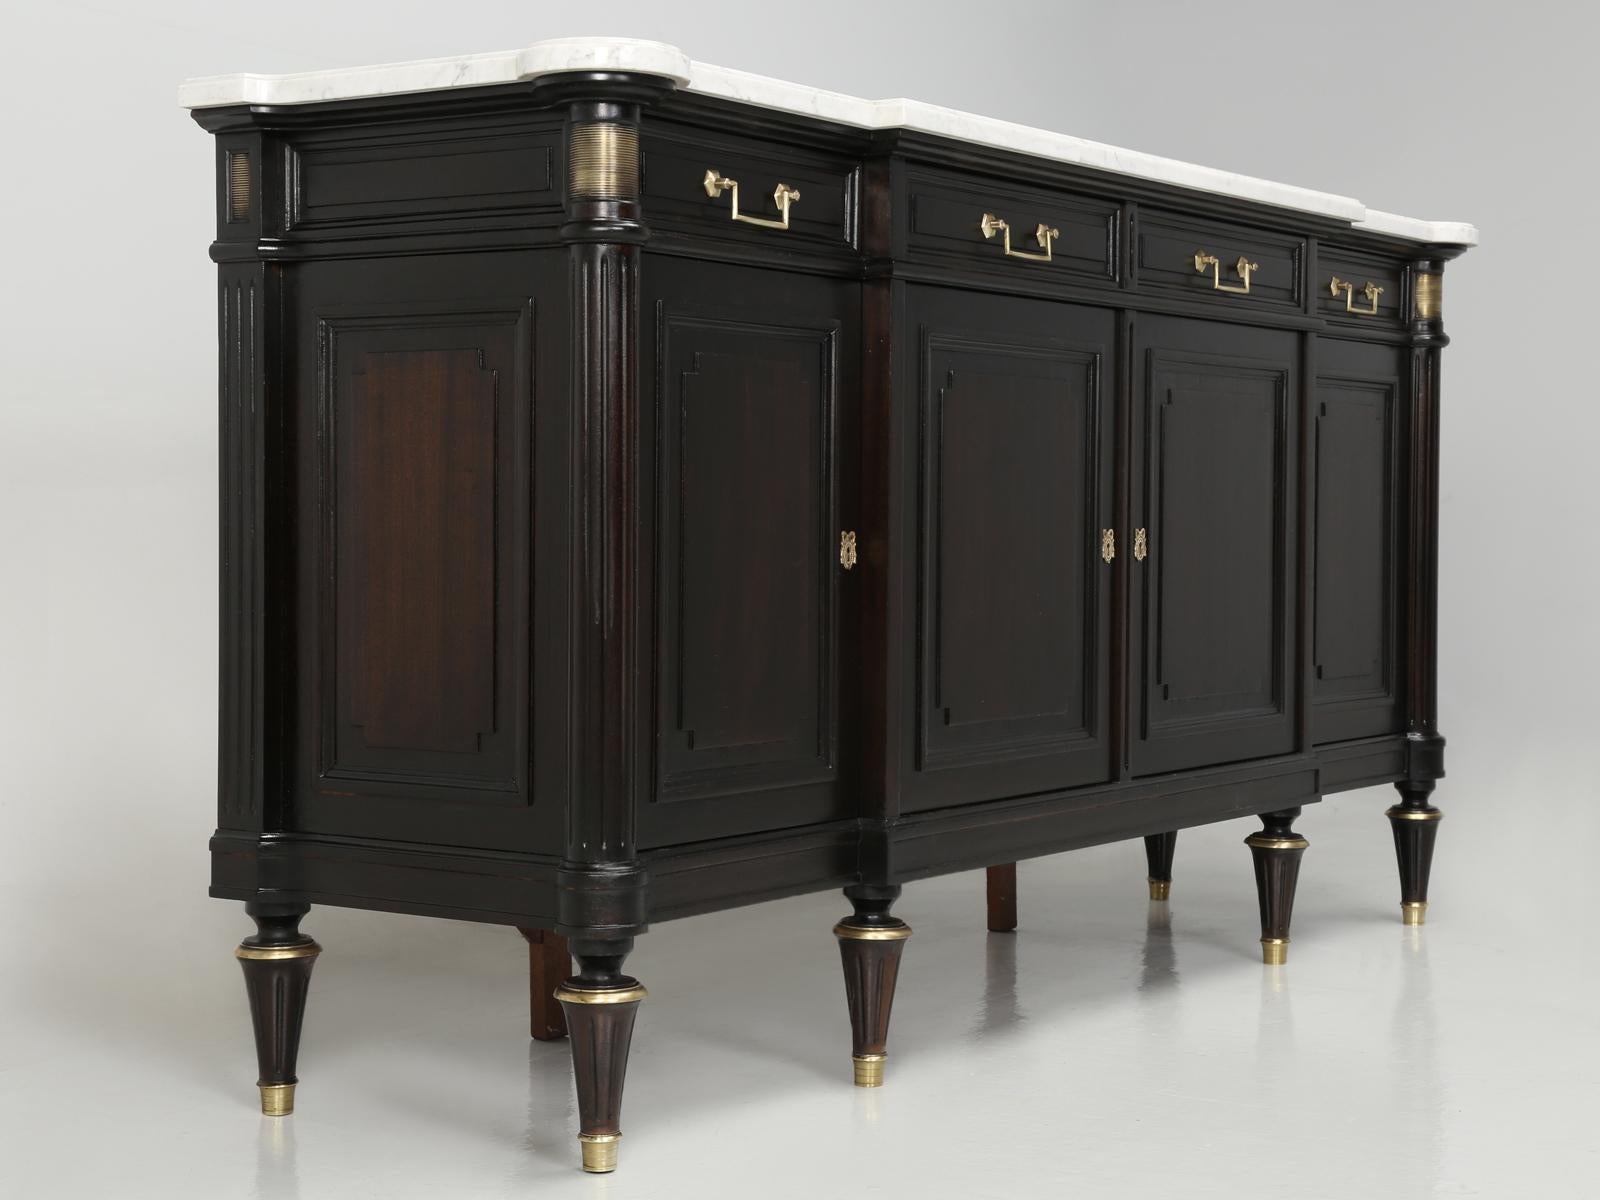 French Louis XVI style buffet that has just come out of our old plank restoration department and we made the decision not to ebonize this French Louis XVI style buffet, but rather apply a coffee bean stain. From a distance, this French buffet does